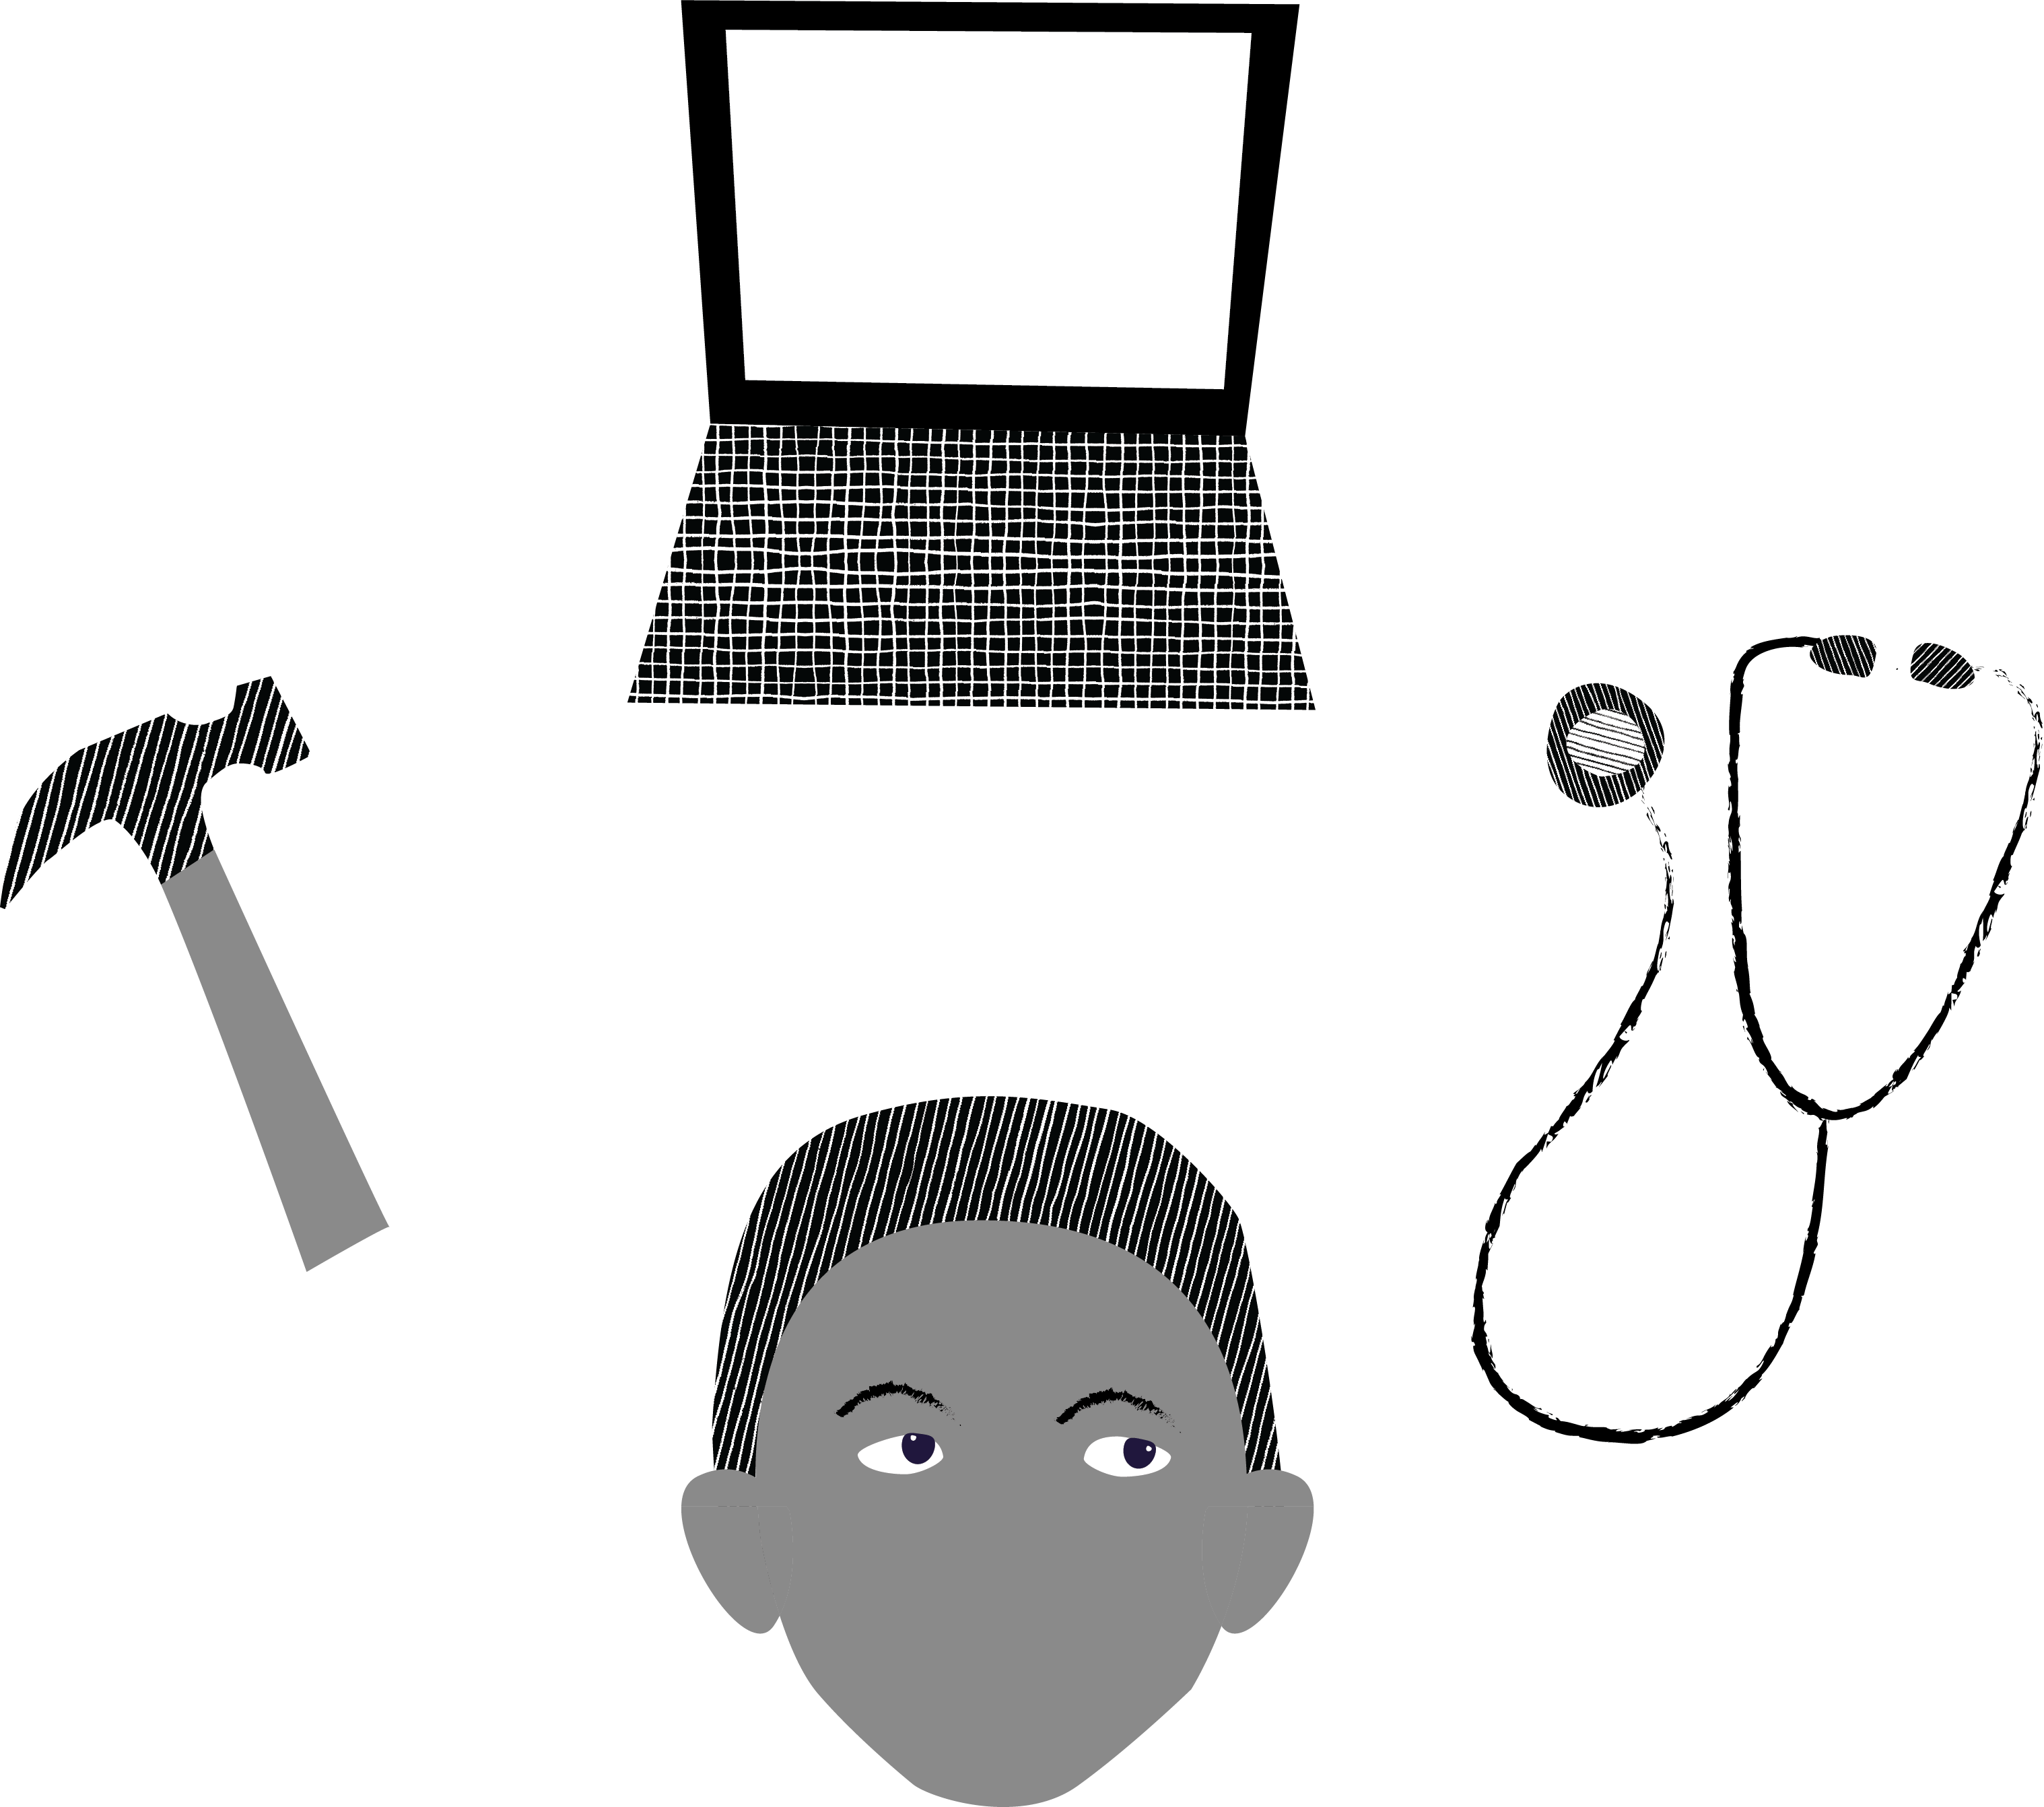 Boy contemplates career options, sees a laptop, hammer, and stethoscope